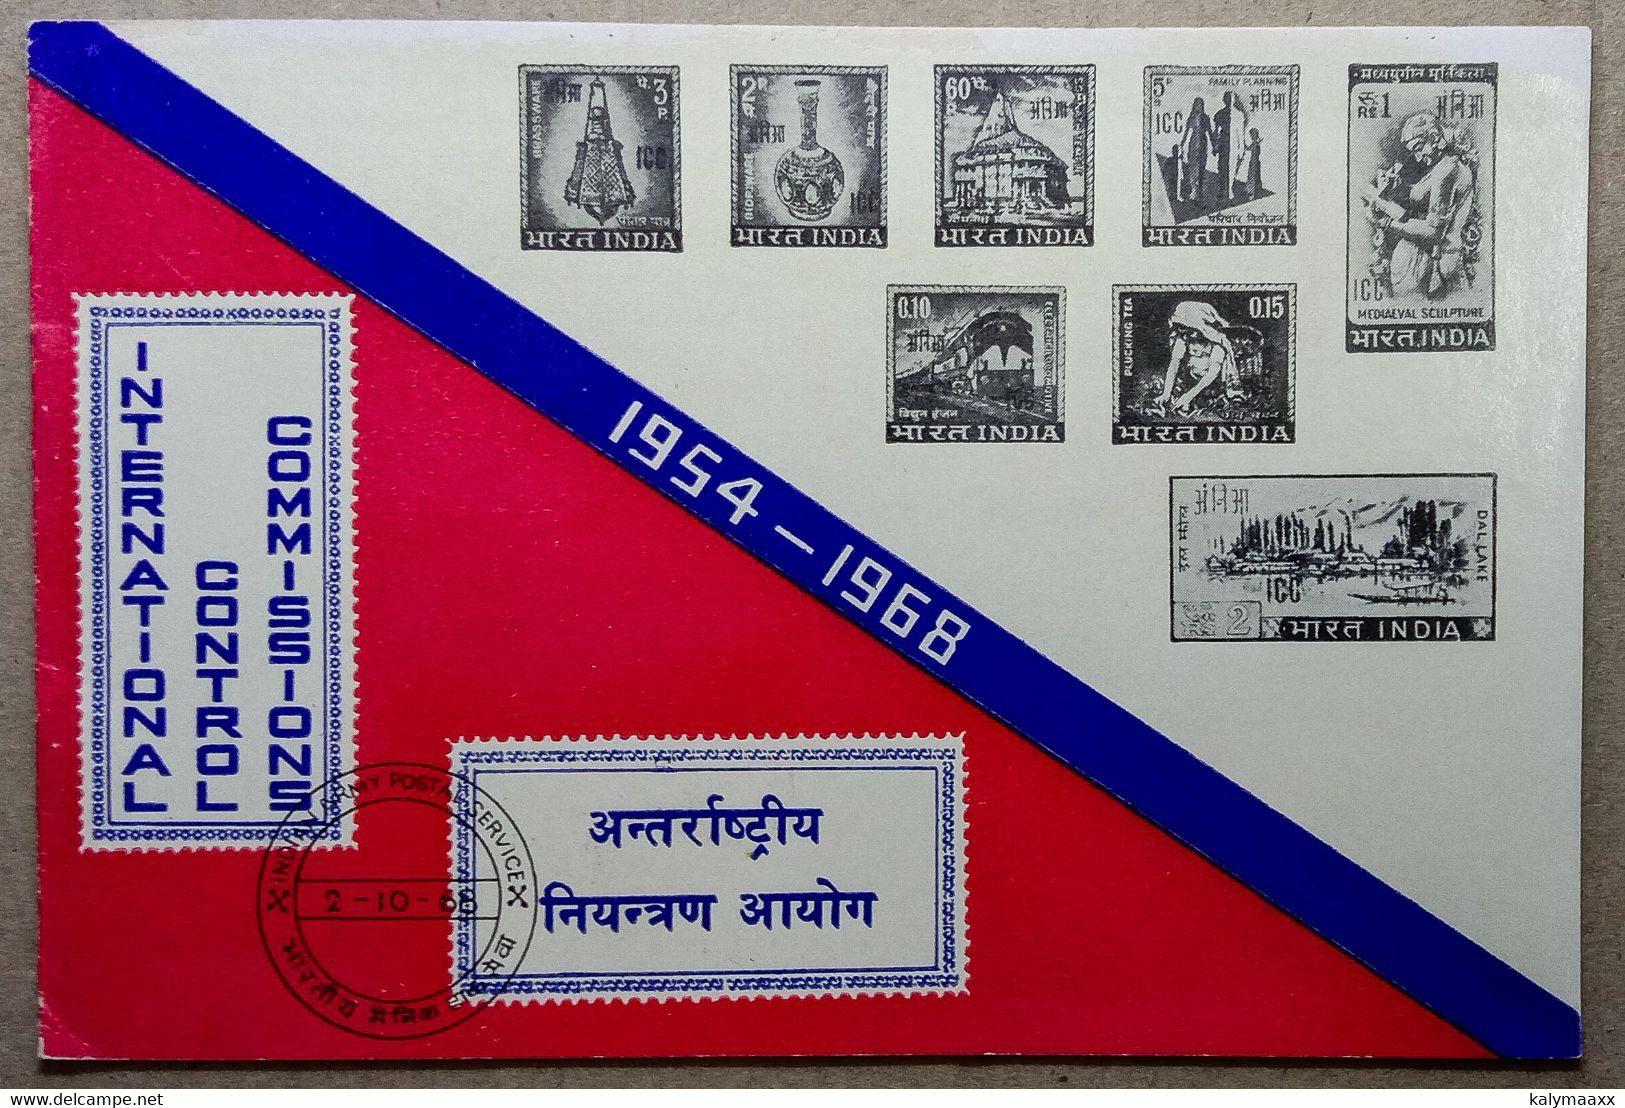 INDIA 1968 ICC OVERPRINTED COMPLETE SET OF 2 F.P.O CANCELLED COVERS & INFORMATION BROCHURE, VIETNAM, LAOS, CAMBODIA - Franquicia Militar